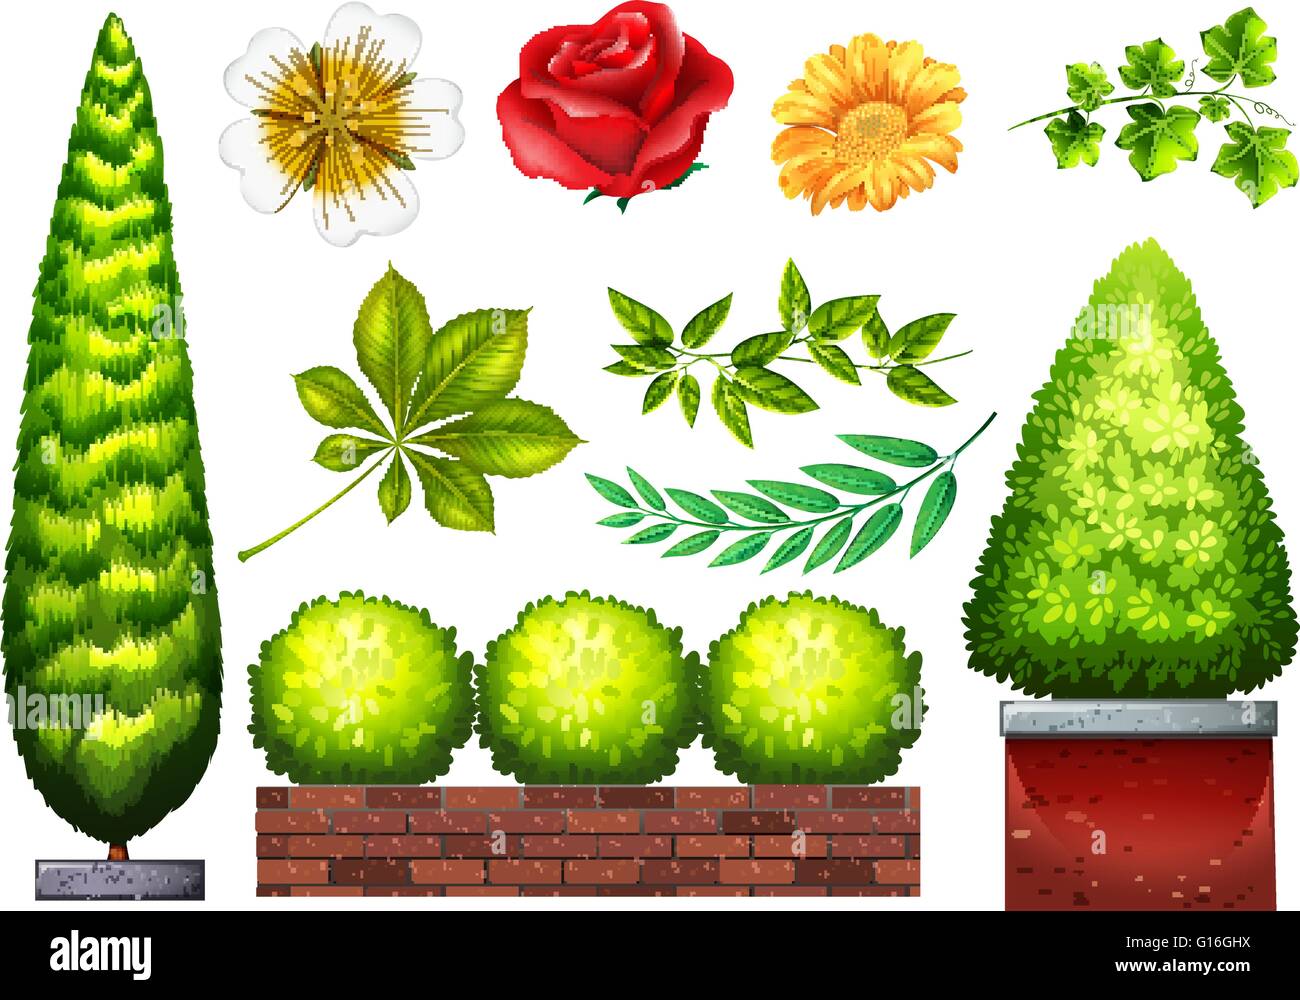 Gardening plants and flowers in many kinds Stock Vector